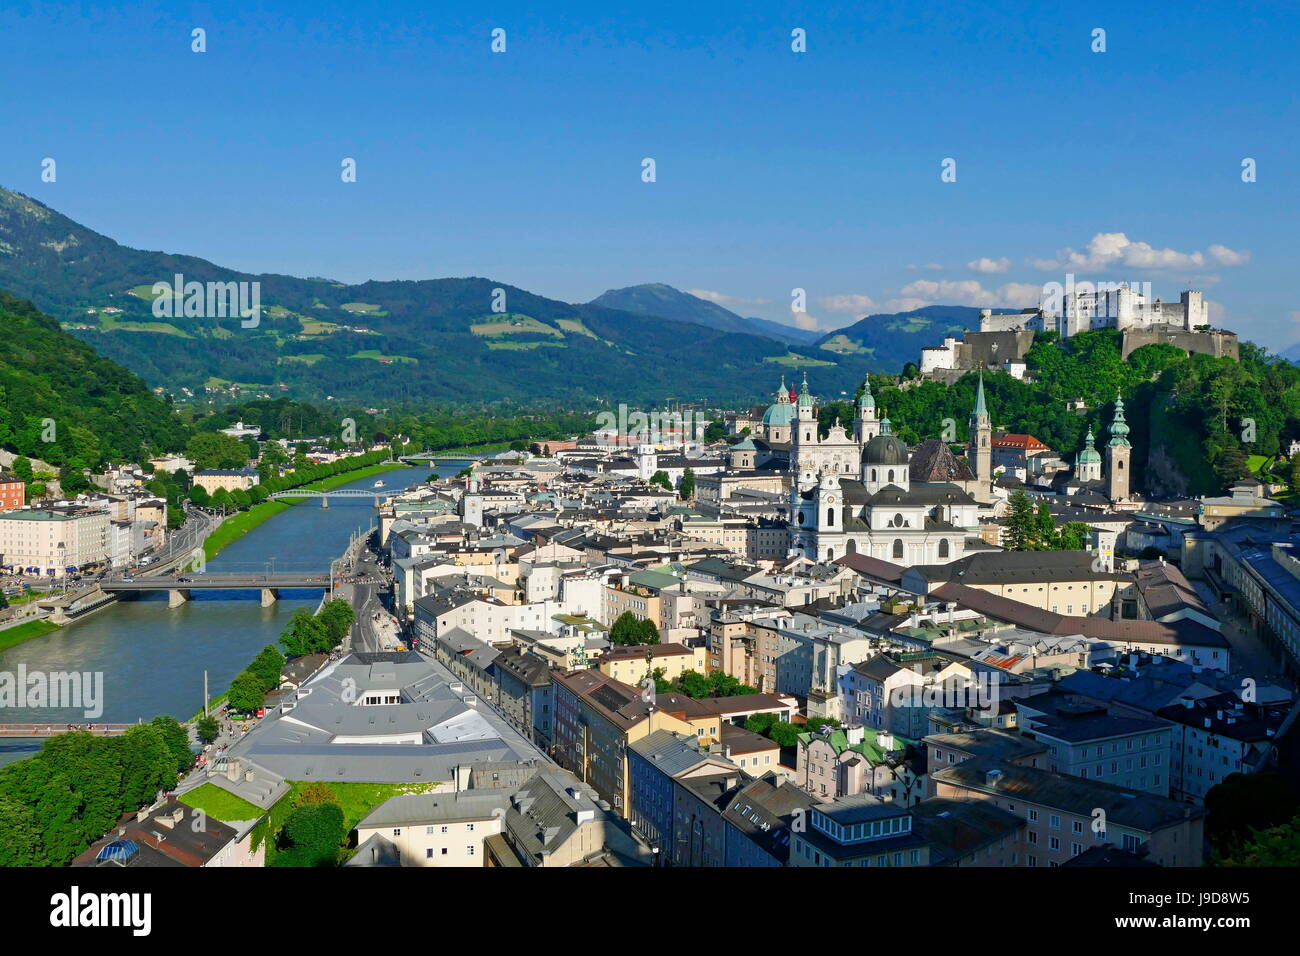 View from Moenchsberg Hill across Salzach River with Cathedral, Collegiate Church and Fortress Hohensalzburg, Salzburg, Austria Stock Photo